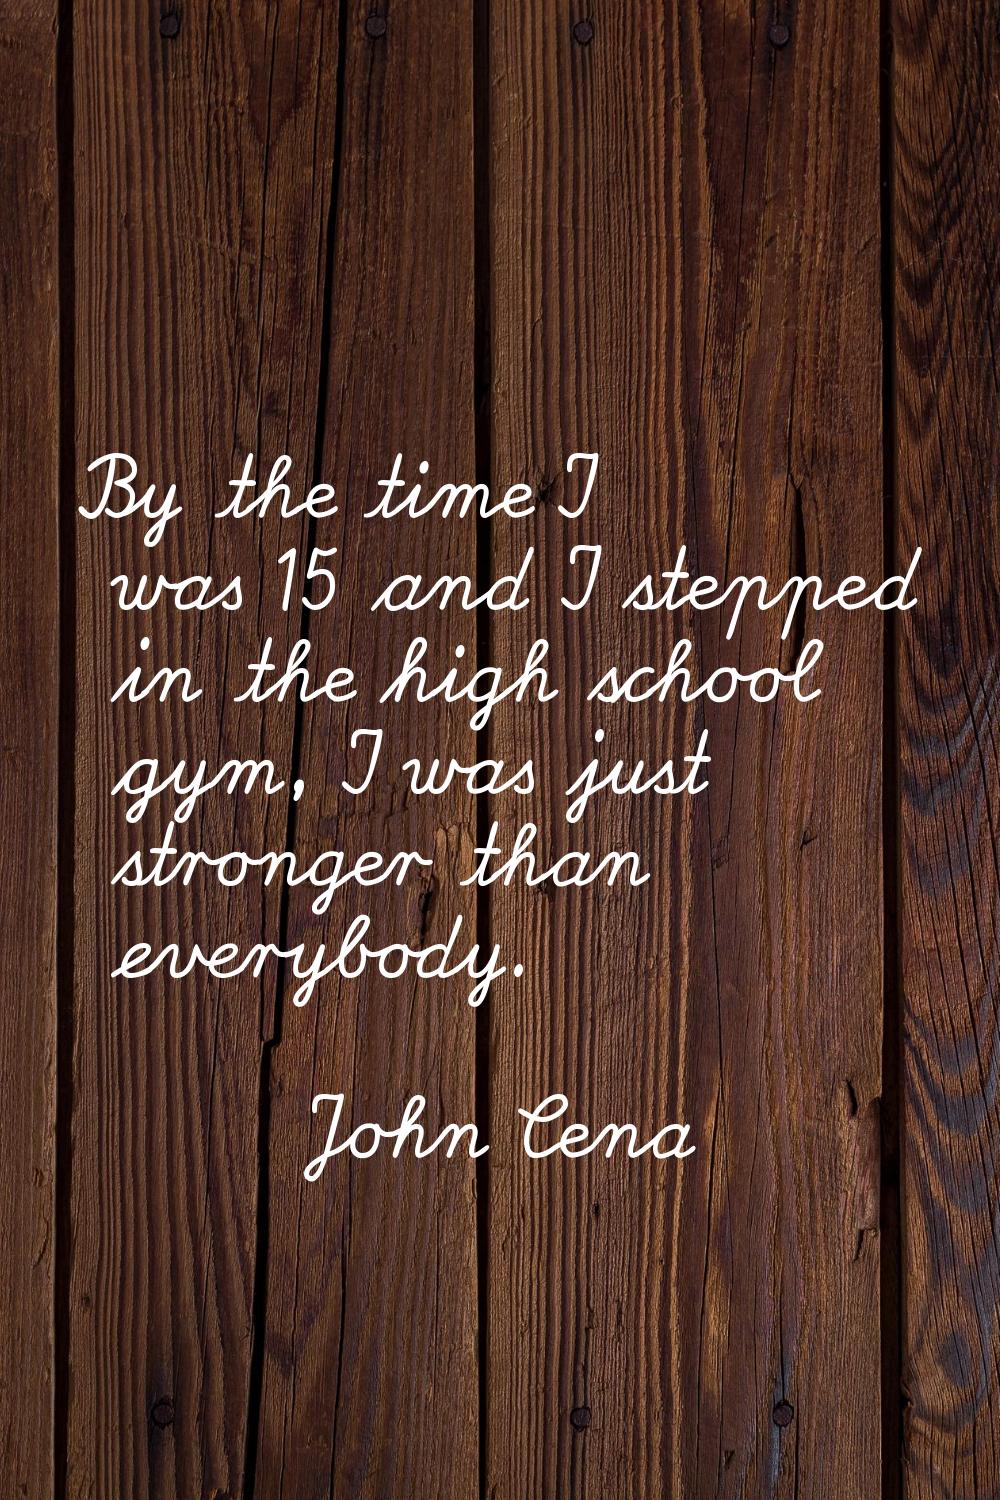 By the time I was 15 and I stepped in the high school gym, I was just stronger than everybody.